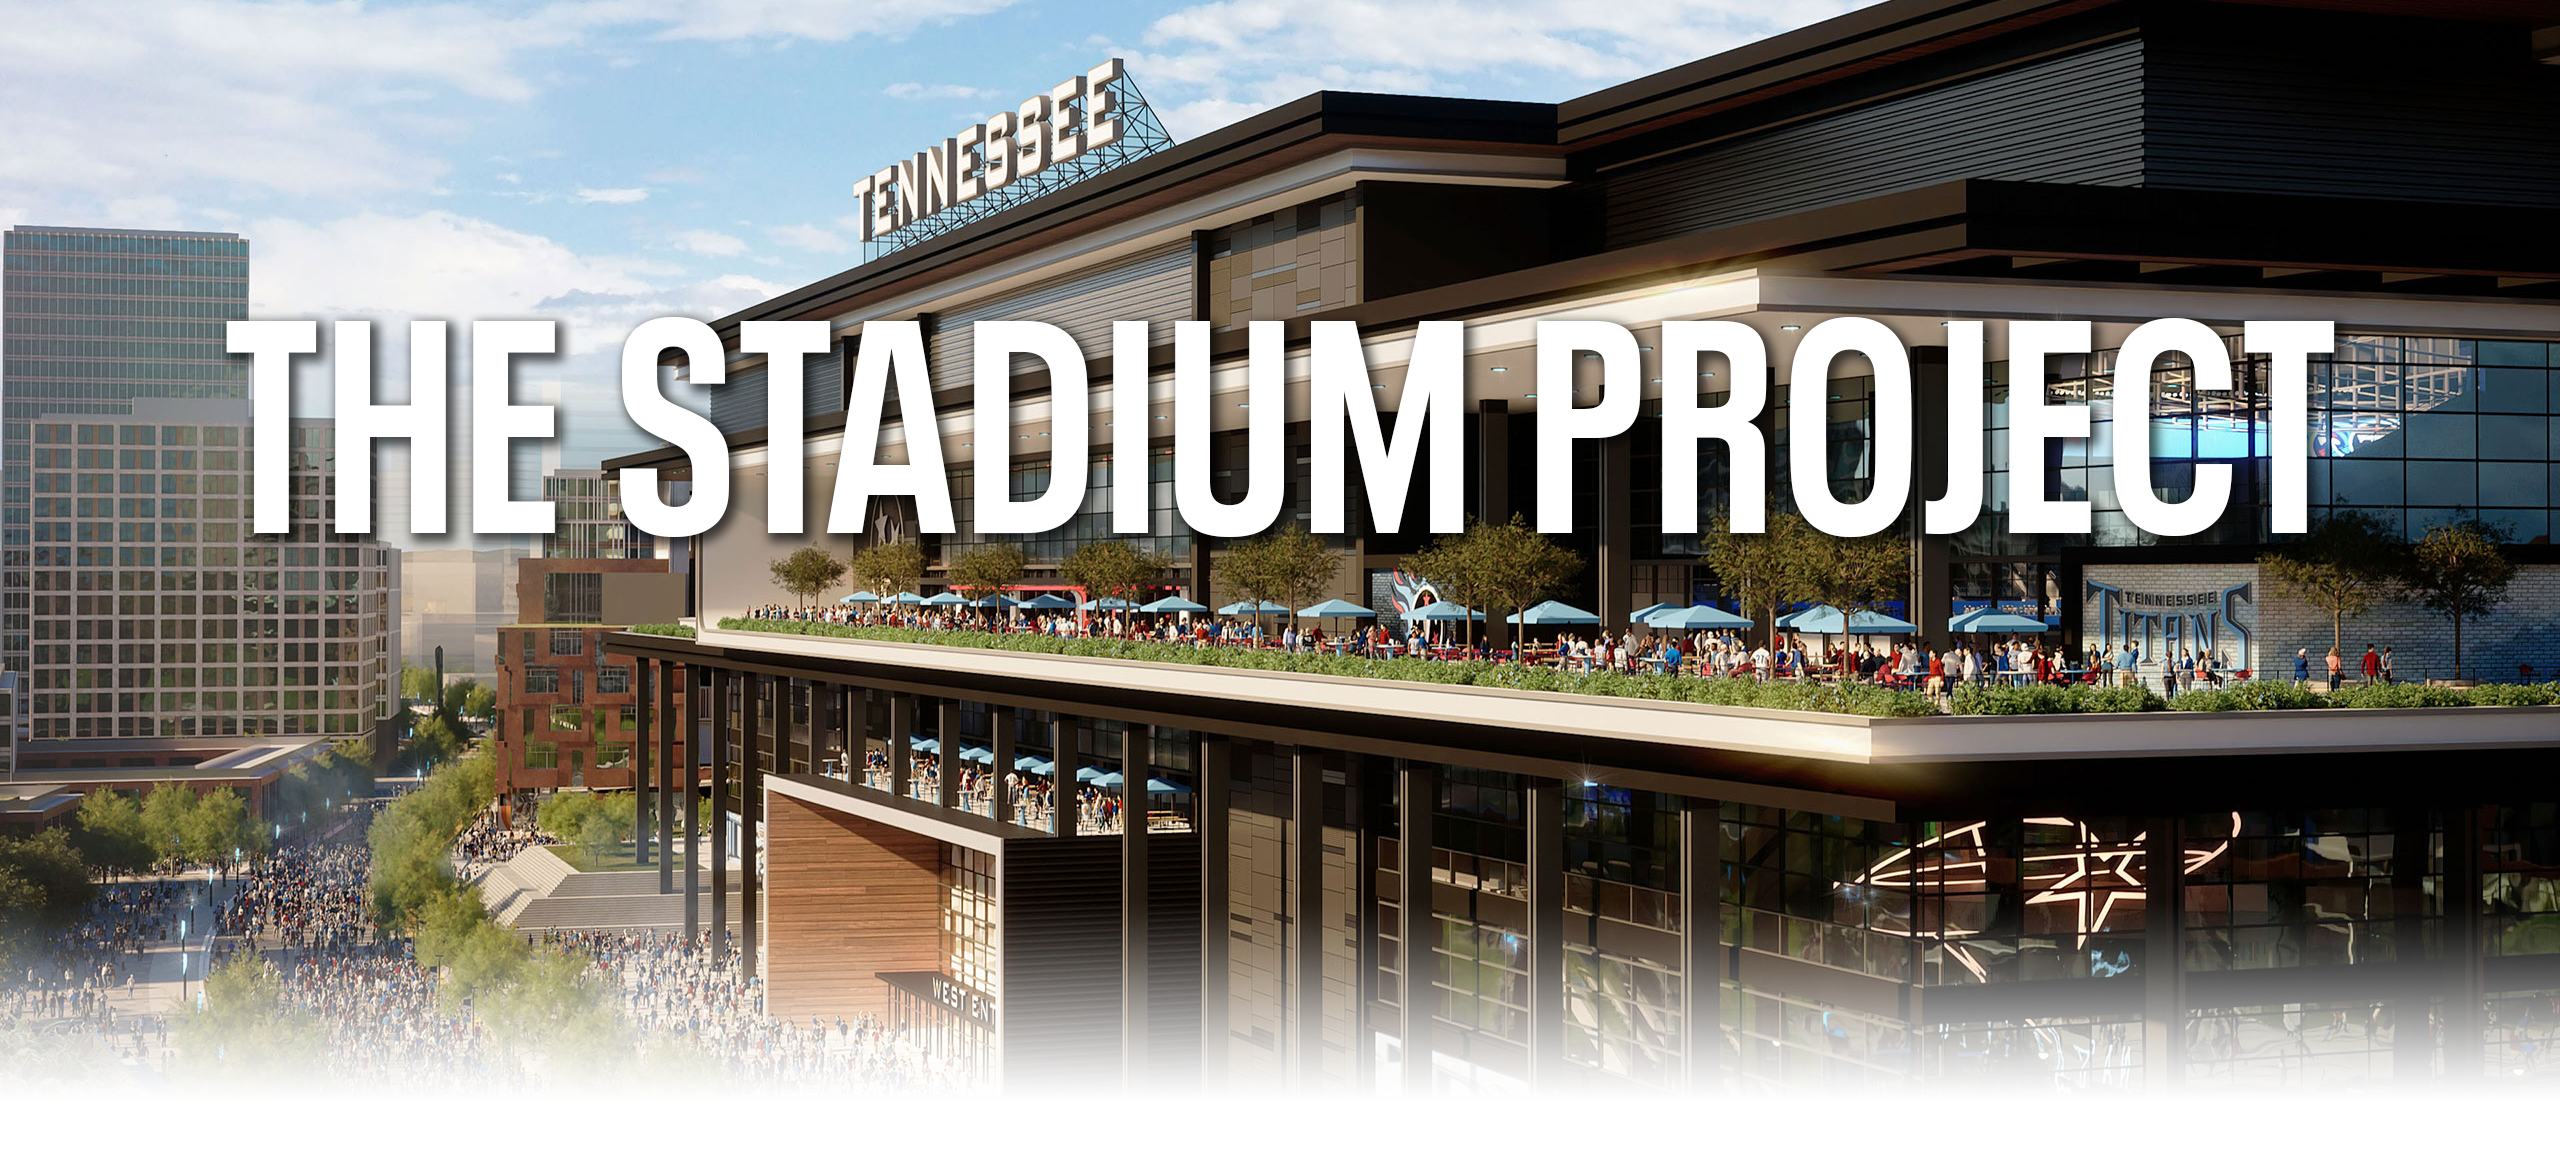 Titans closer to new stadium with $500 million from state - The